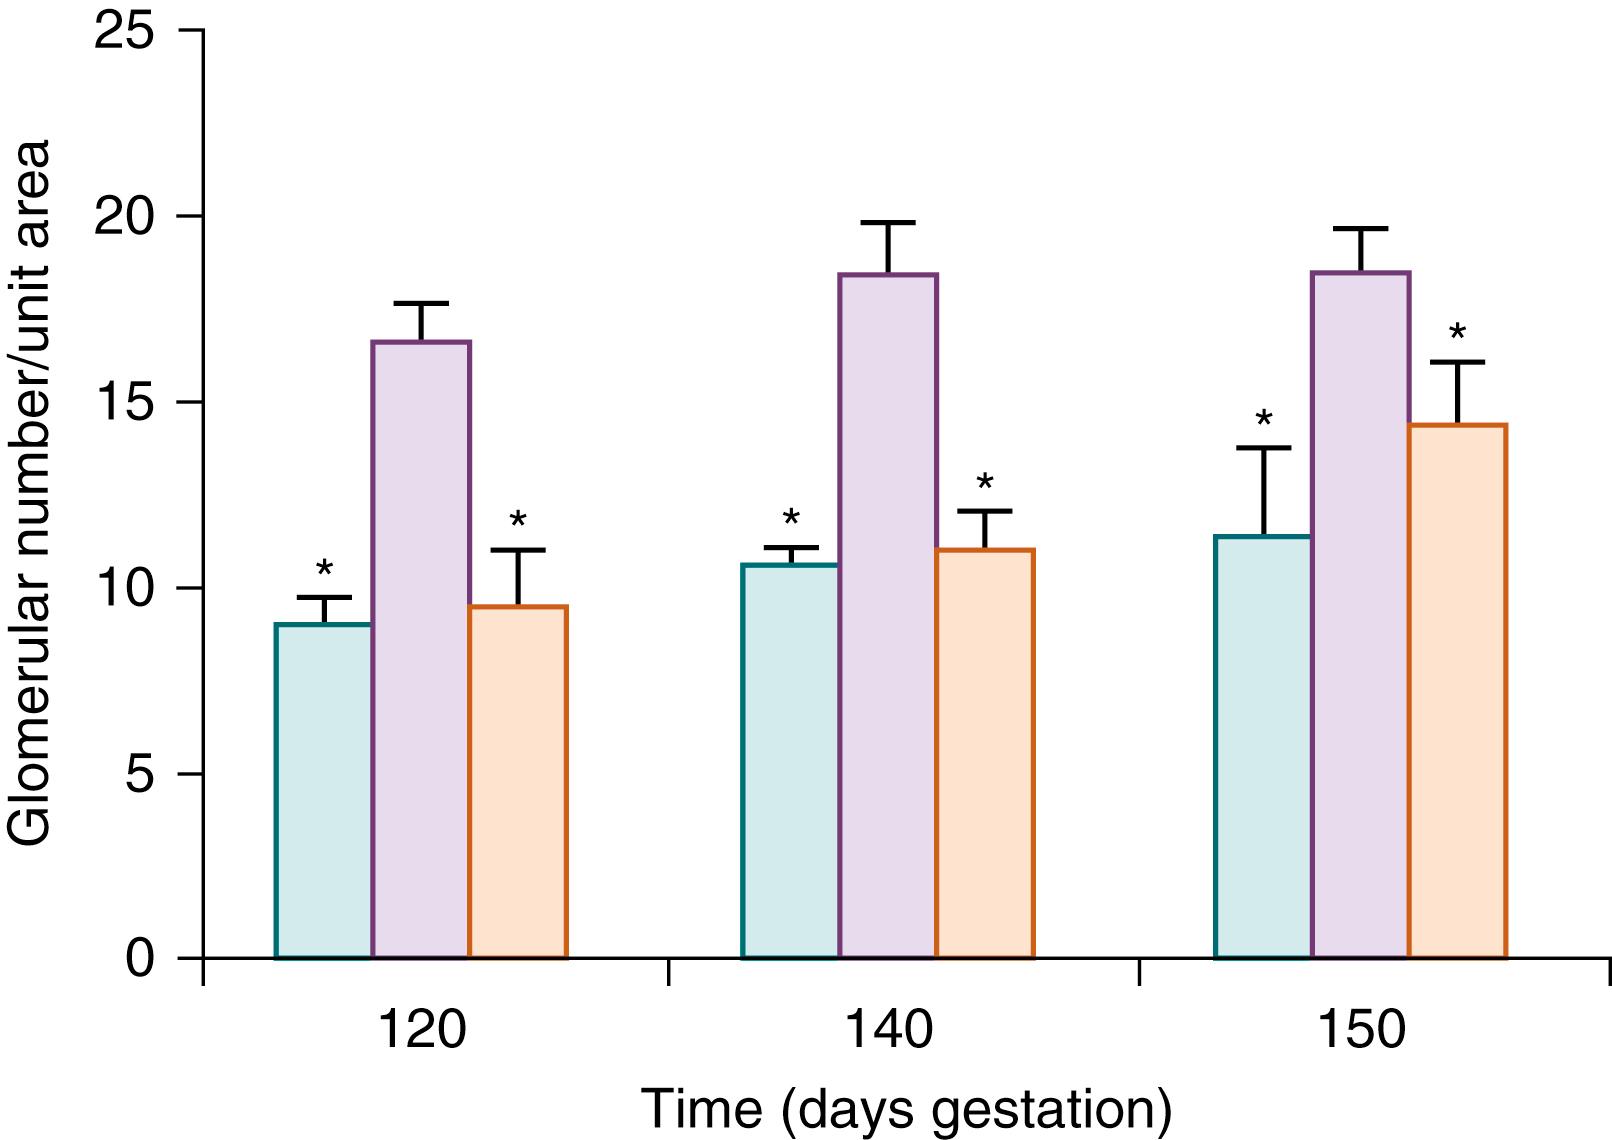 Fig. 94.5, Reduction of nephron number due to congenital urinary tract obstruction. In utero unilateral ureteric obstruction in fetal non-human primates results in a significant reduction in glomerular numbers at late gestation (120 and 140 days) and at term (150 days) in obstructed fetal kidneys (green bars) compared to control non-obstructed kidneys (purple bars) and to contralateral kidneys (pink bars) . ∗ P <0.01 versus control kidneys.